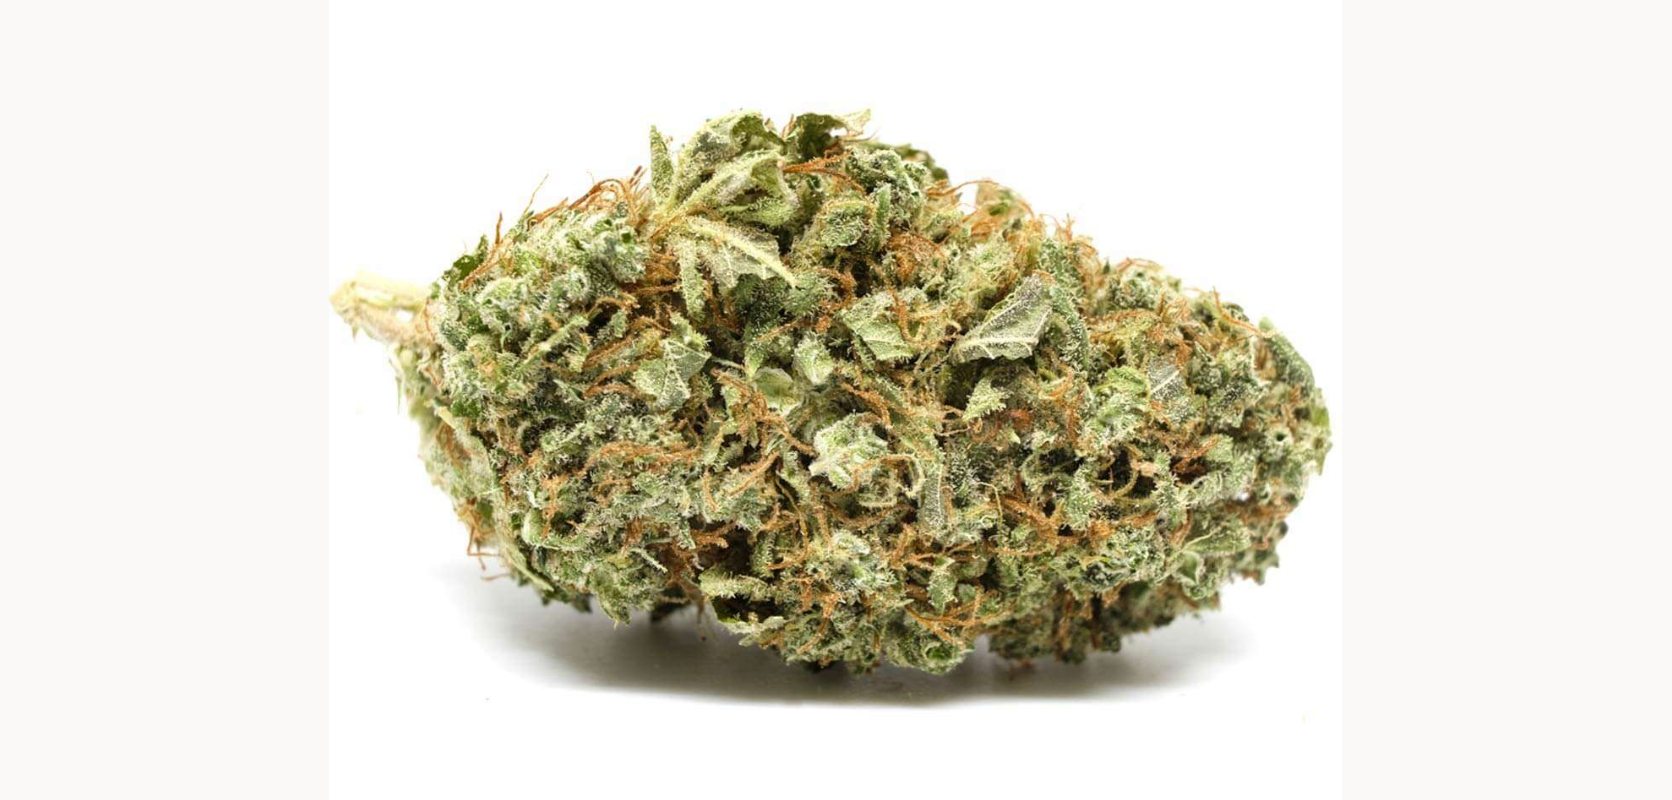 You are ready to try the Green Congo strain, but you don't know where to look. Worry not, we've got you covered! 